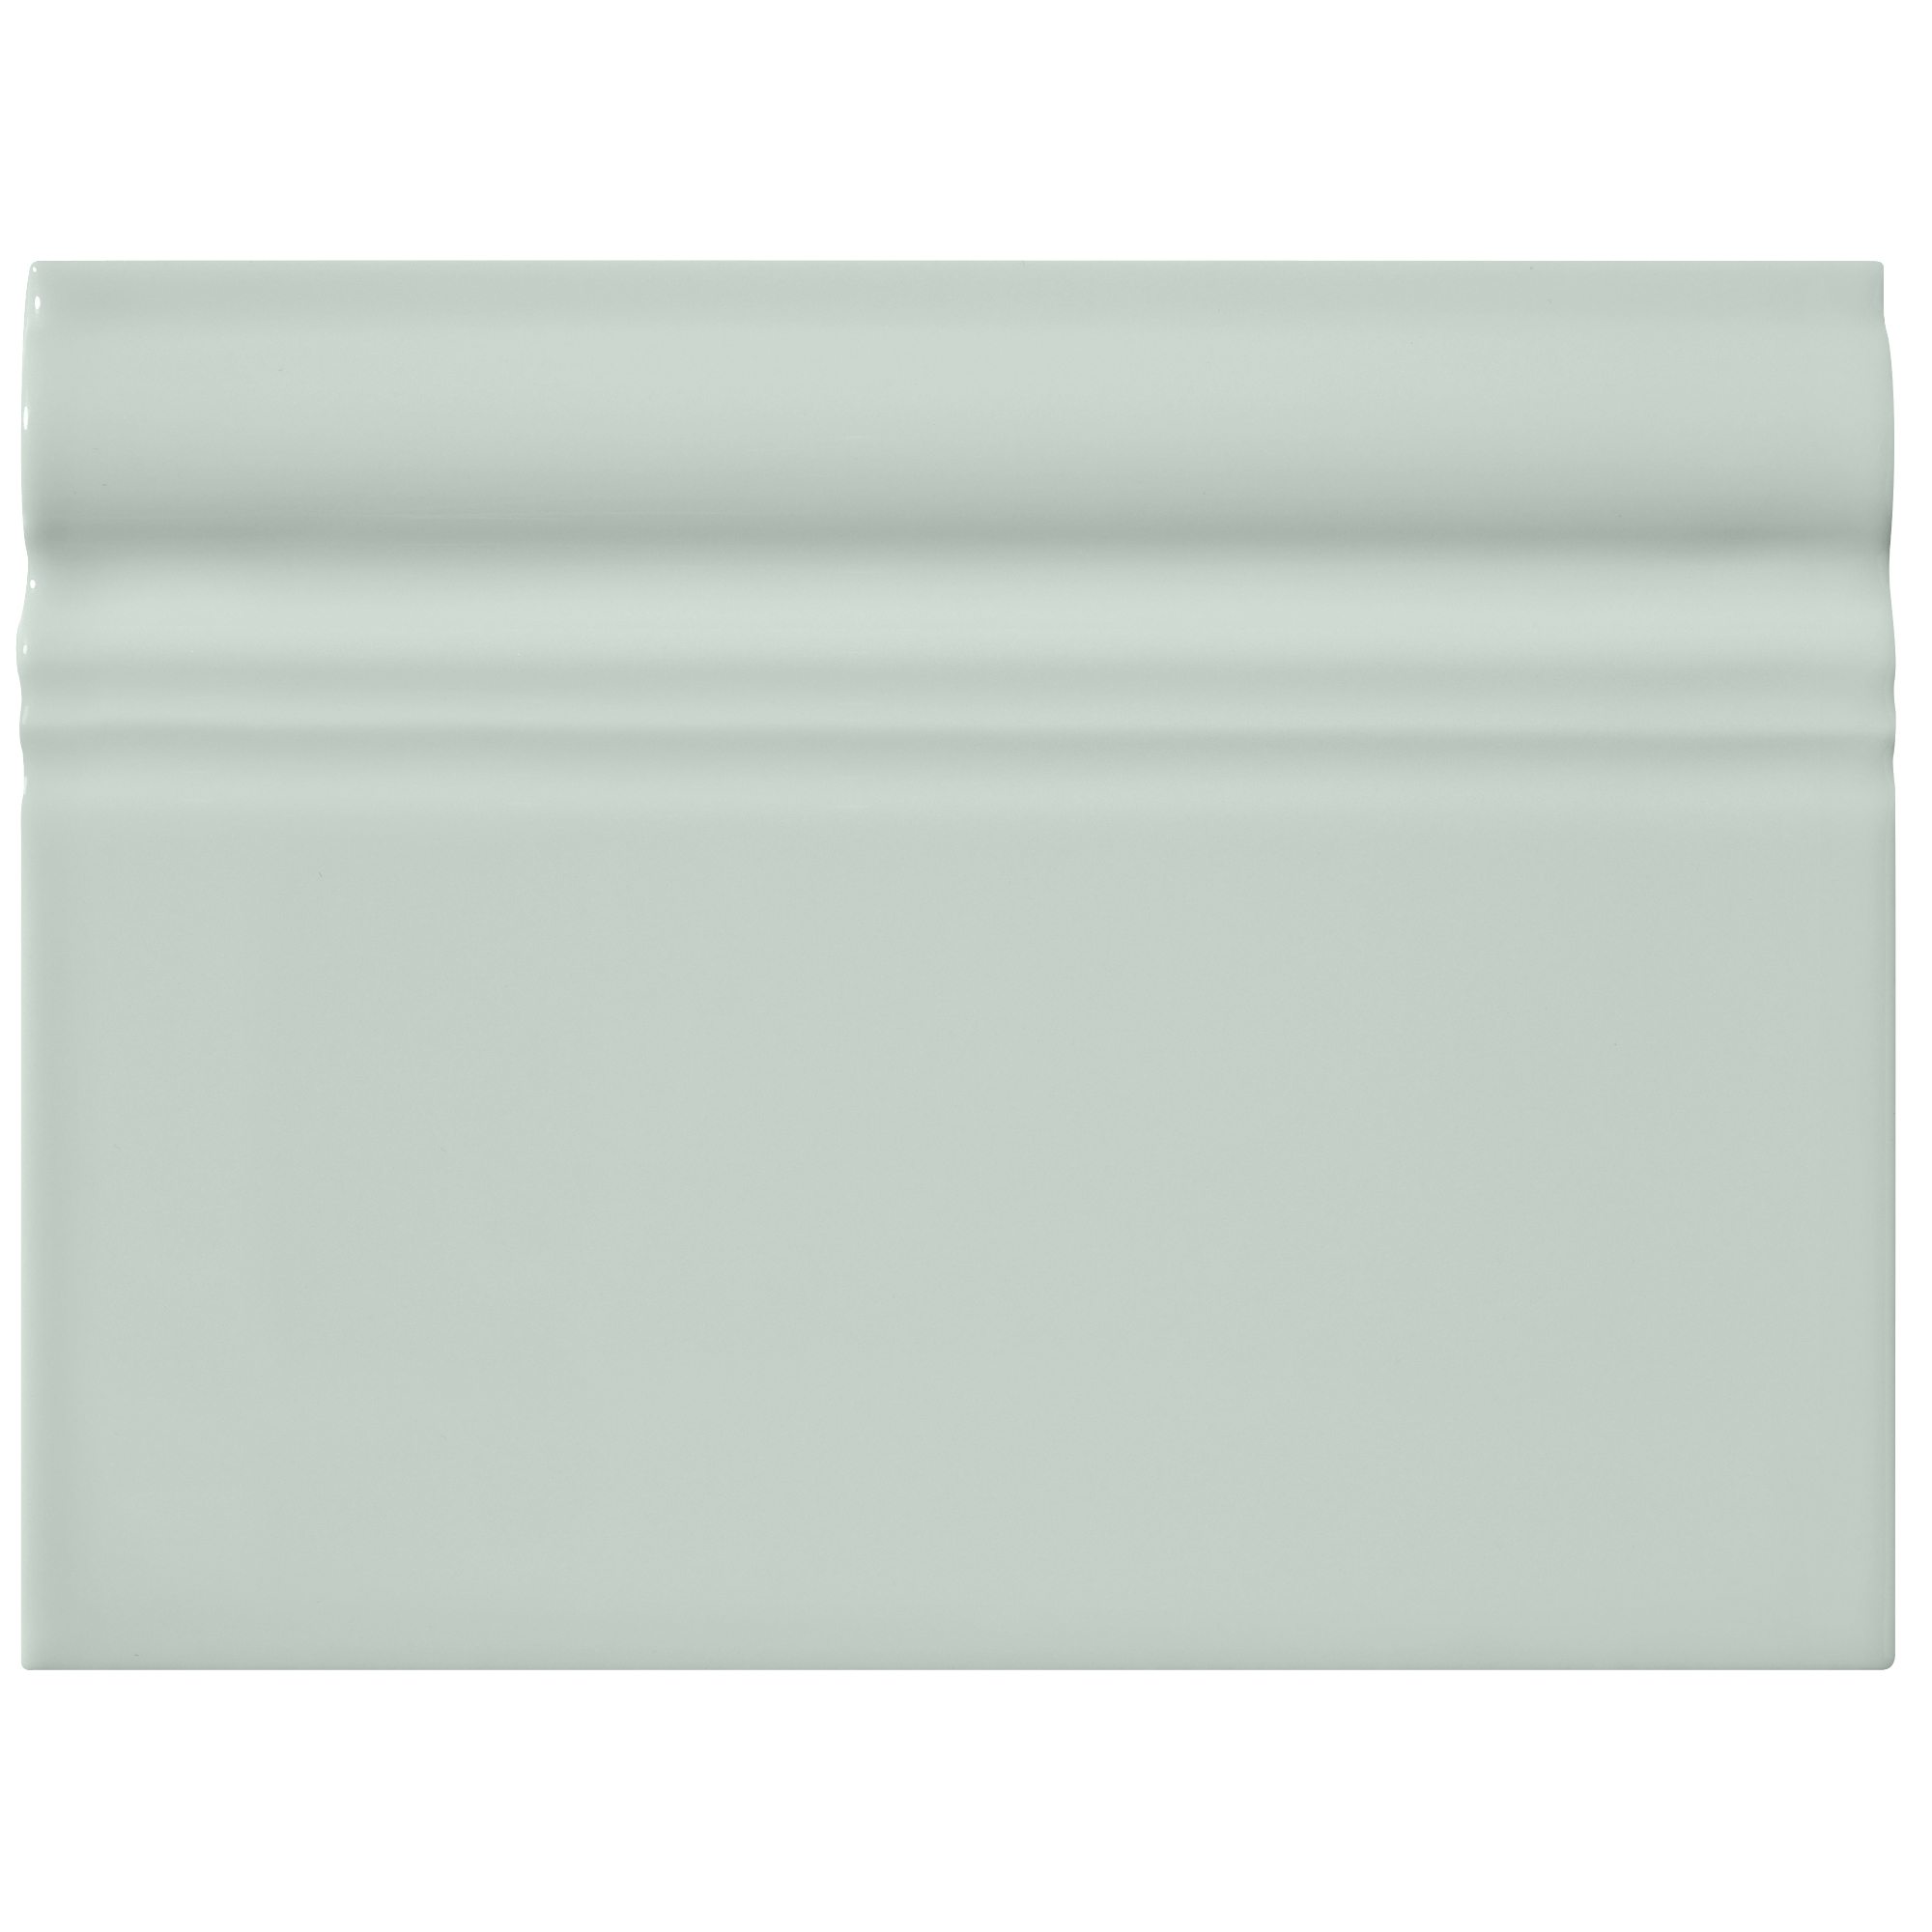 Imperial Mint Gls (073) Skirting 20cm